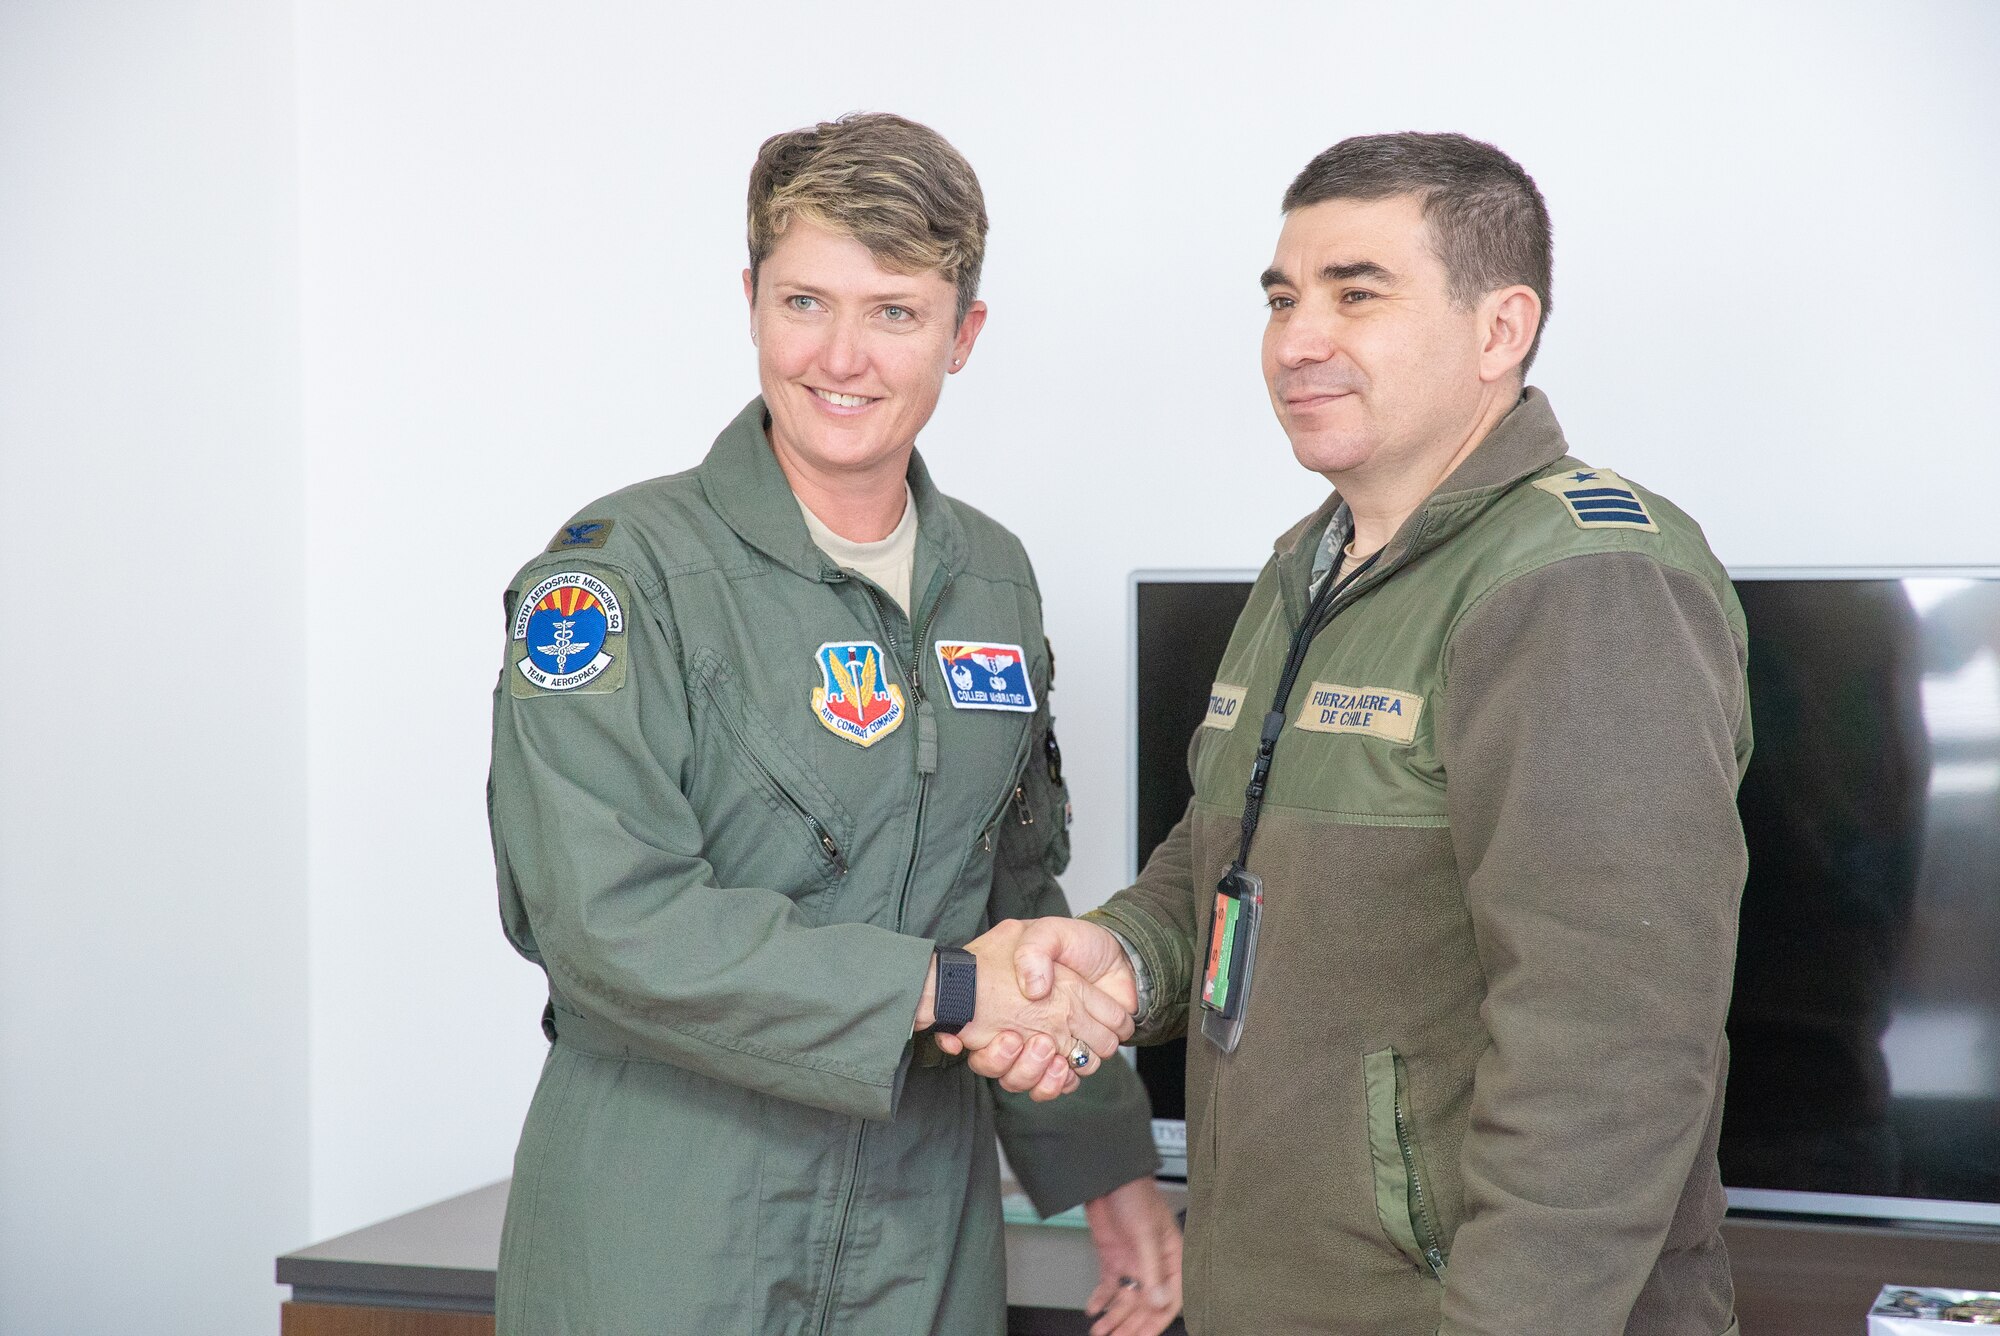 Col. Colleen McBratney, 355th Aerospace Medicine Squadron Commander, Davis-Monthan AFB, AZ., poses for a photo with Chilean Air Force Commander Claudio Montiglio during a health services administration subject matter expert exchange with the Chilean Air Force at the Hospital Clínico, Santiago, June 4-8.